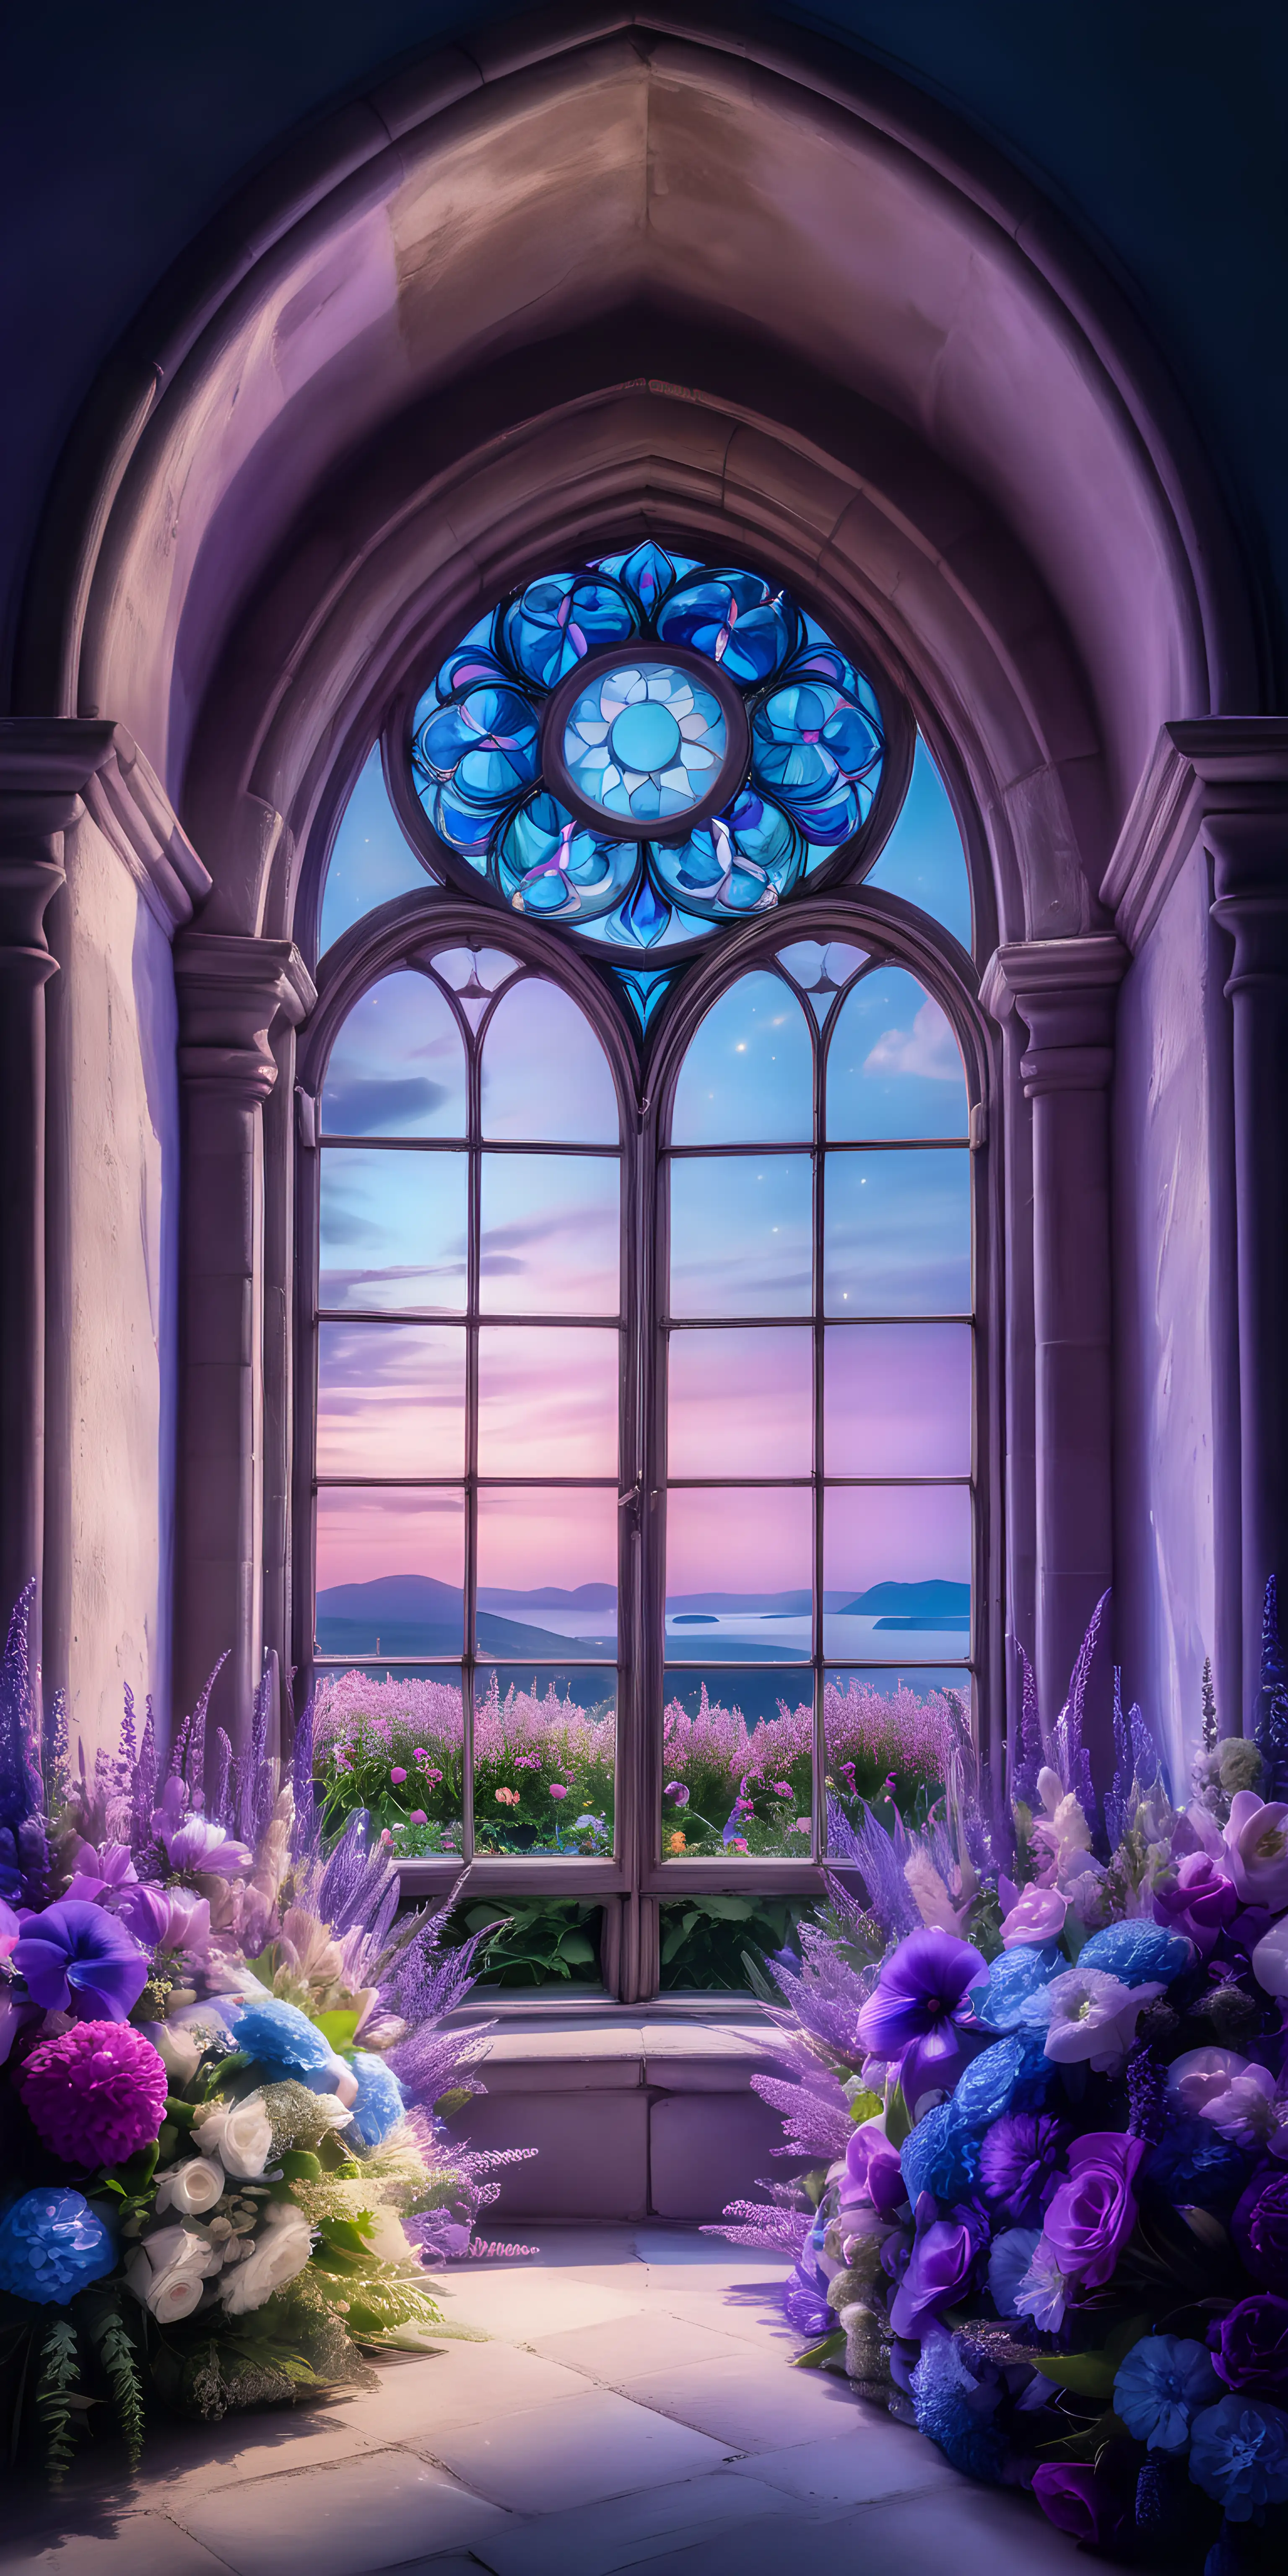 Enchanted Arched Window Vignette with Floral Circle